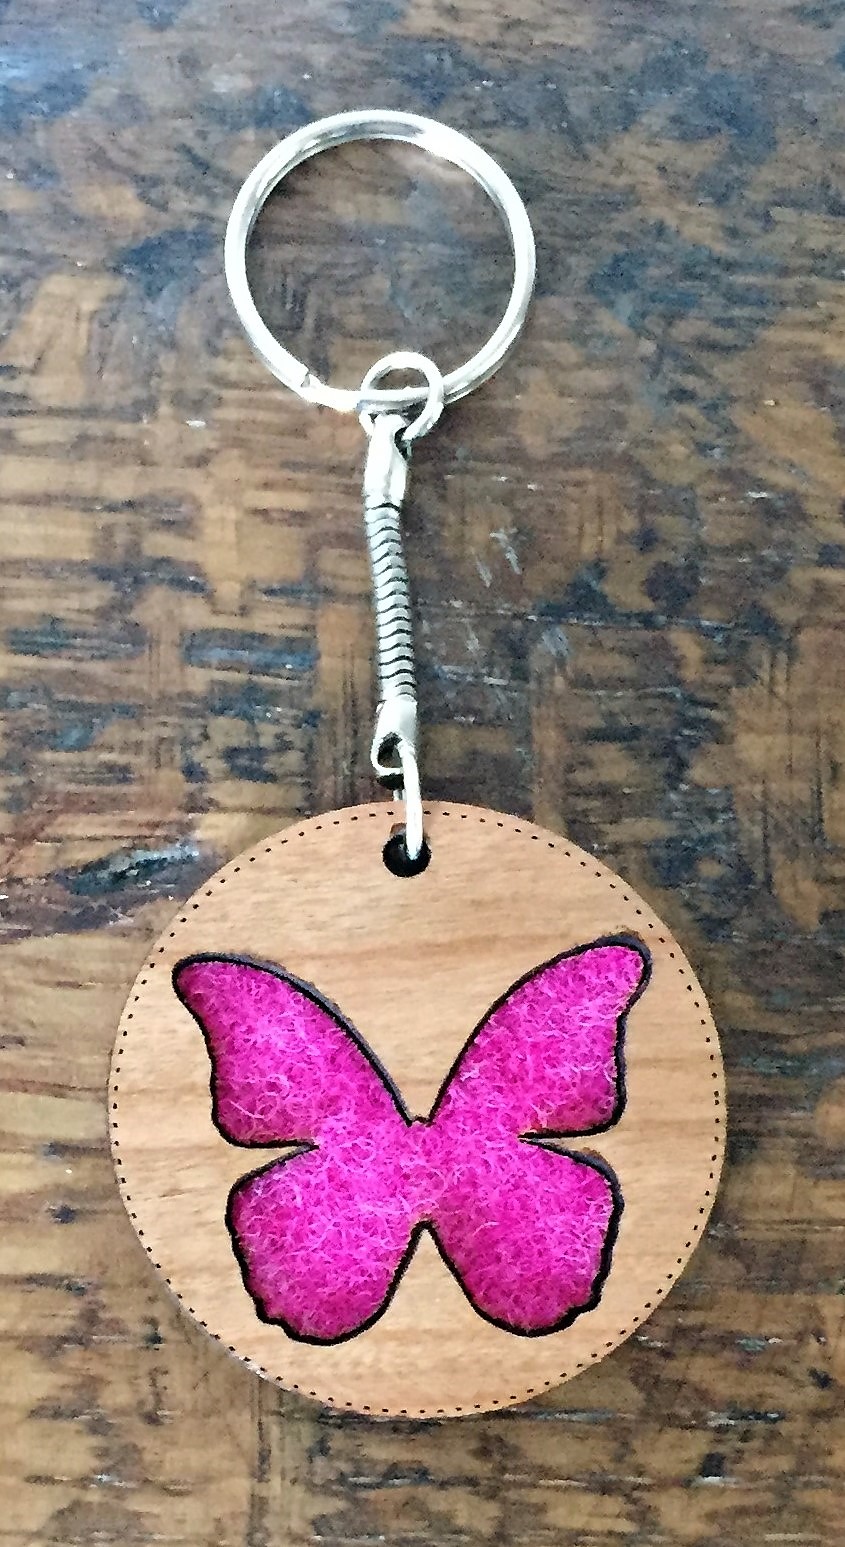 Wooden Key Ring with Harris Tweed - Butterfly Key Ring